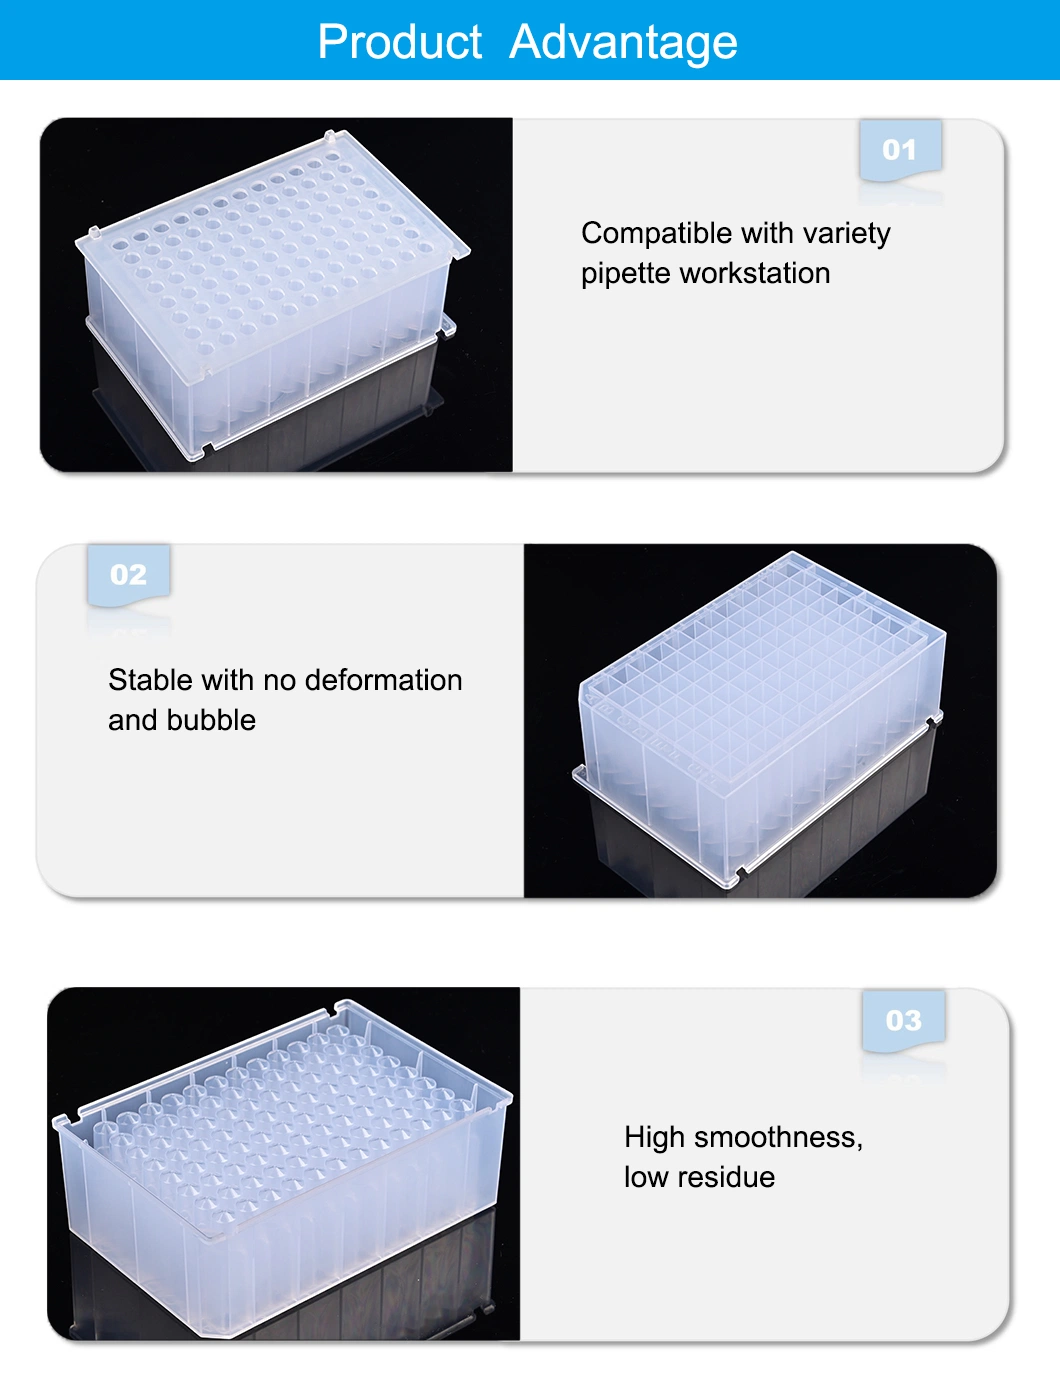 Highly Chemical-Resistant Plates 2.2ml 96 Square Deep Well Plate Conical Bottom Used with Kingfisher Purification System for Dedicated Analytic Application